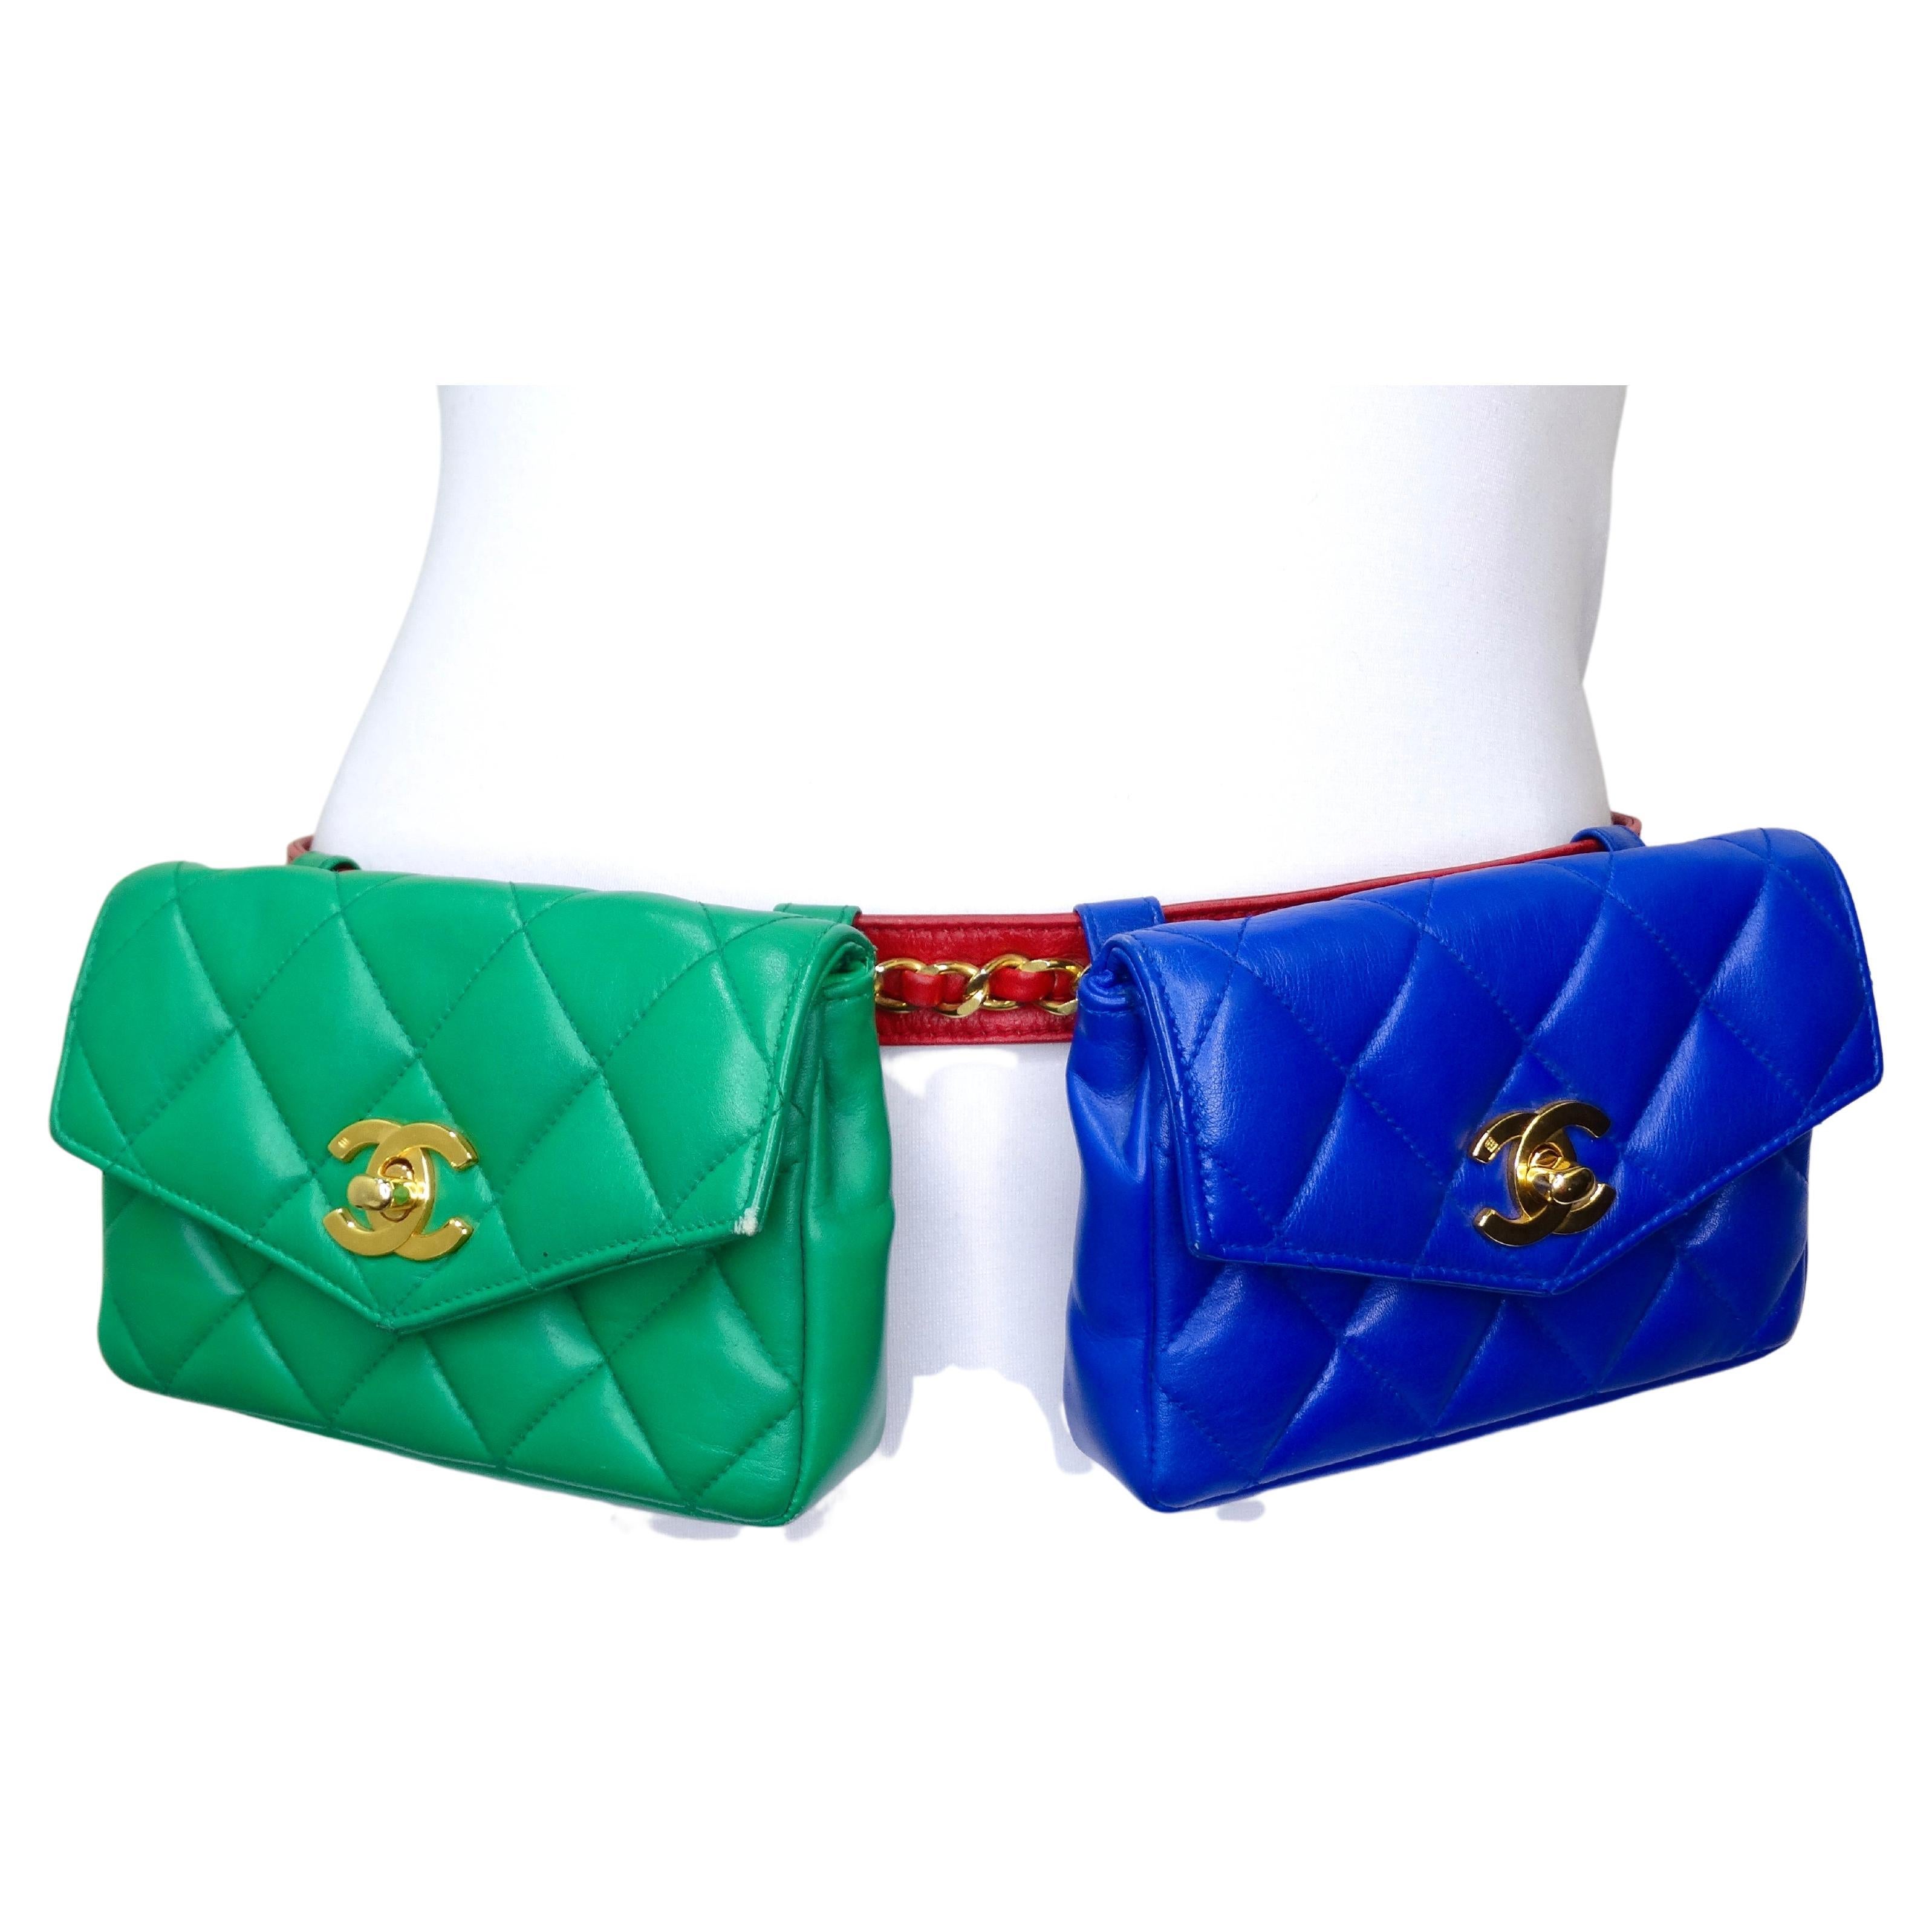 This is the most fashionable and playful  belt bag from the house of Chanel! Don't miss out on the chance to have a piece of Chanel history with this gem from the 1980's. Everything is better vintage! The condition of this bag proves this. This is